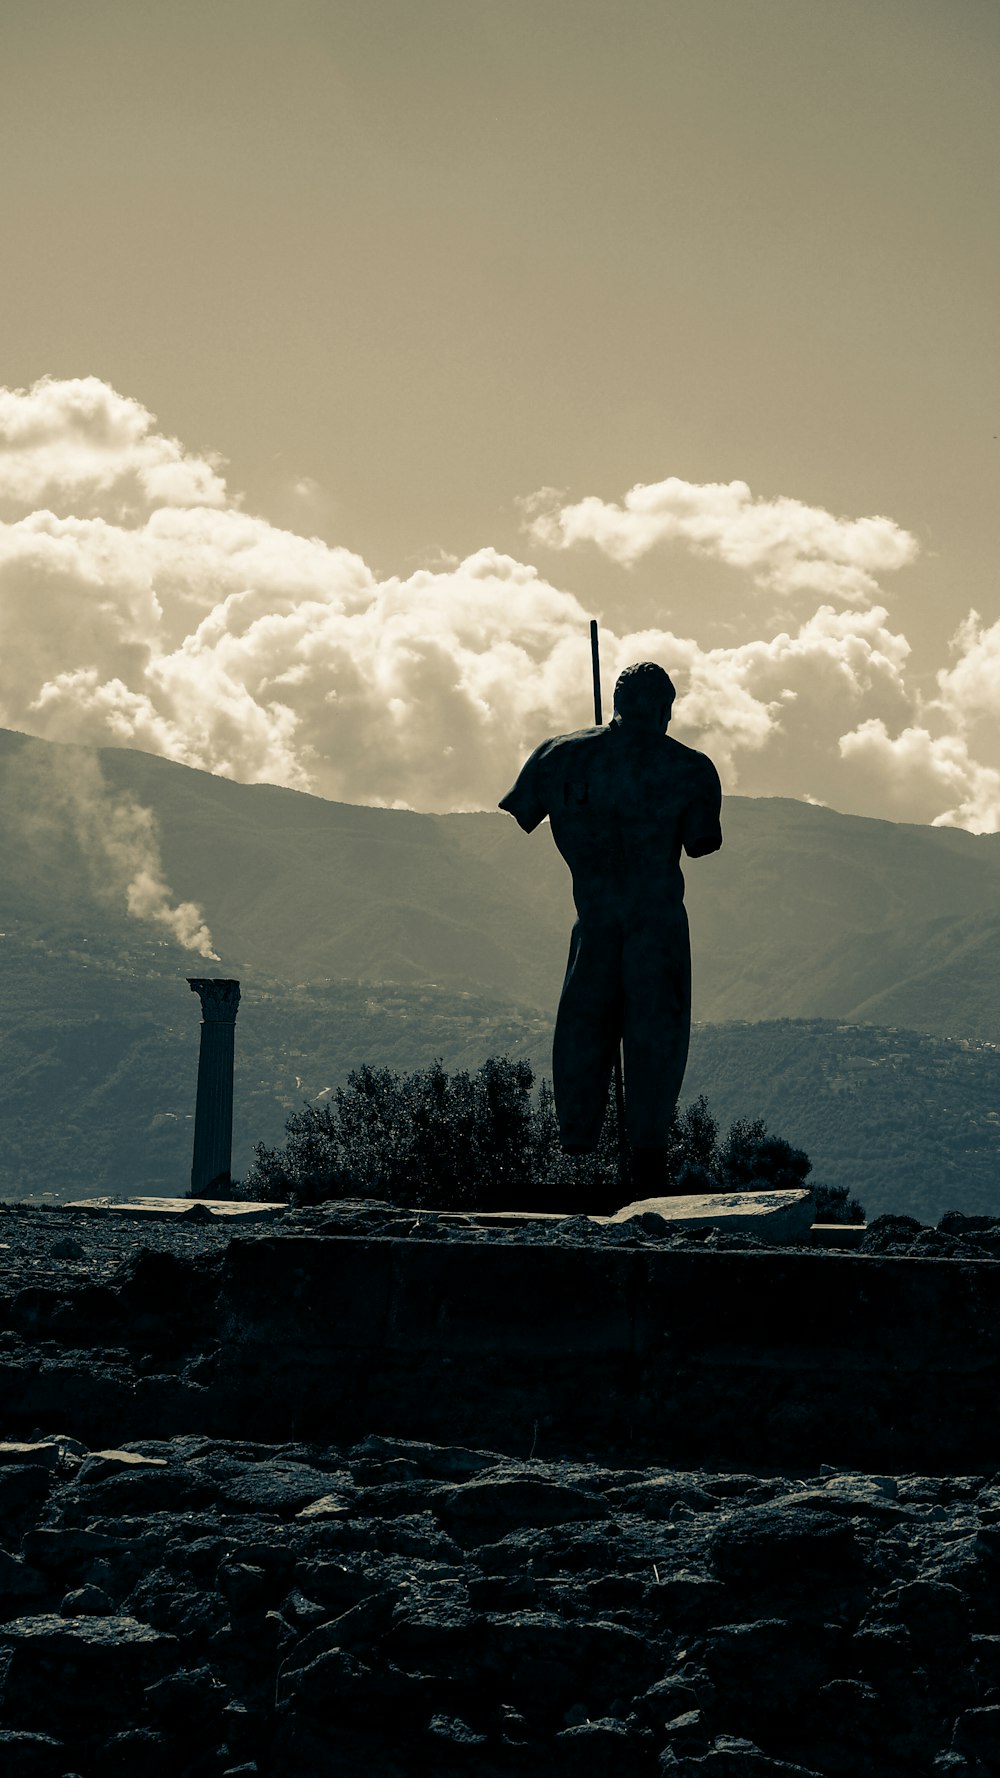 silhouette of man standing on concrete wall near mountain under cloudy sky during daytime